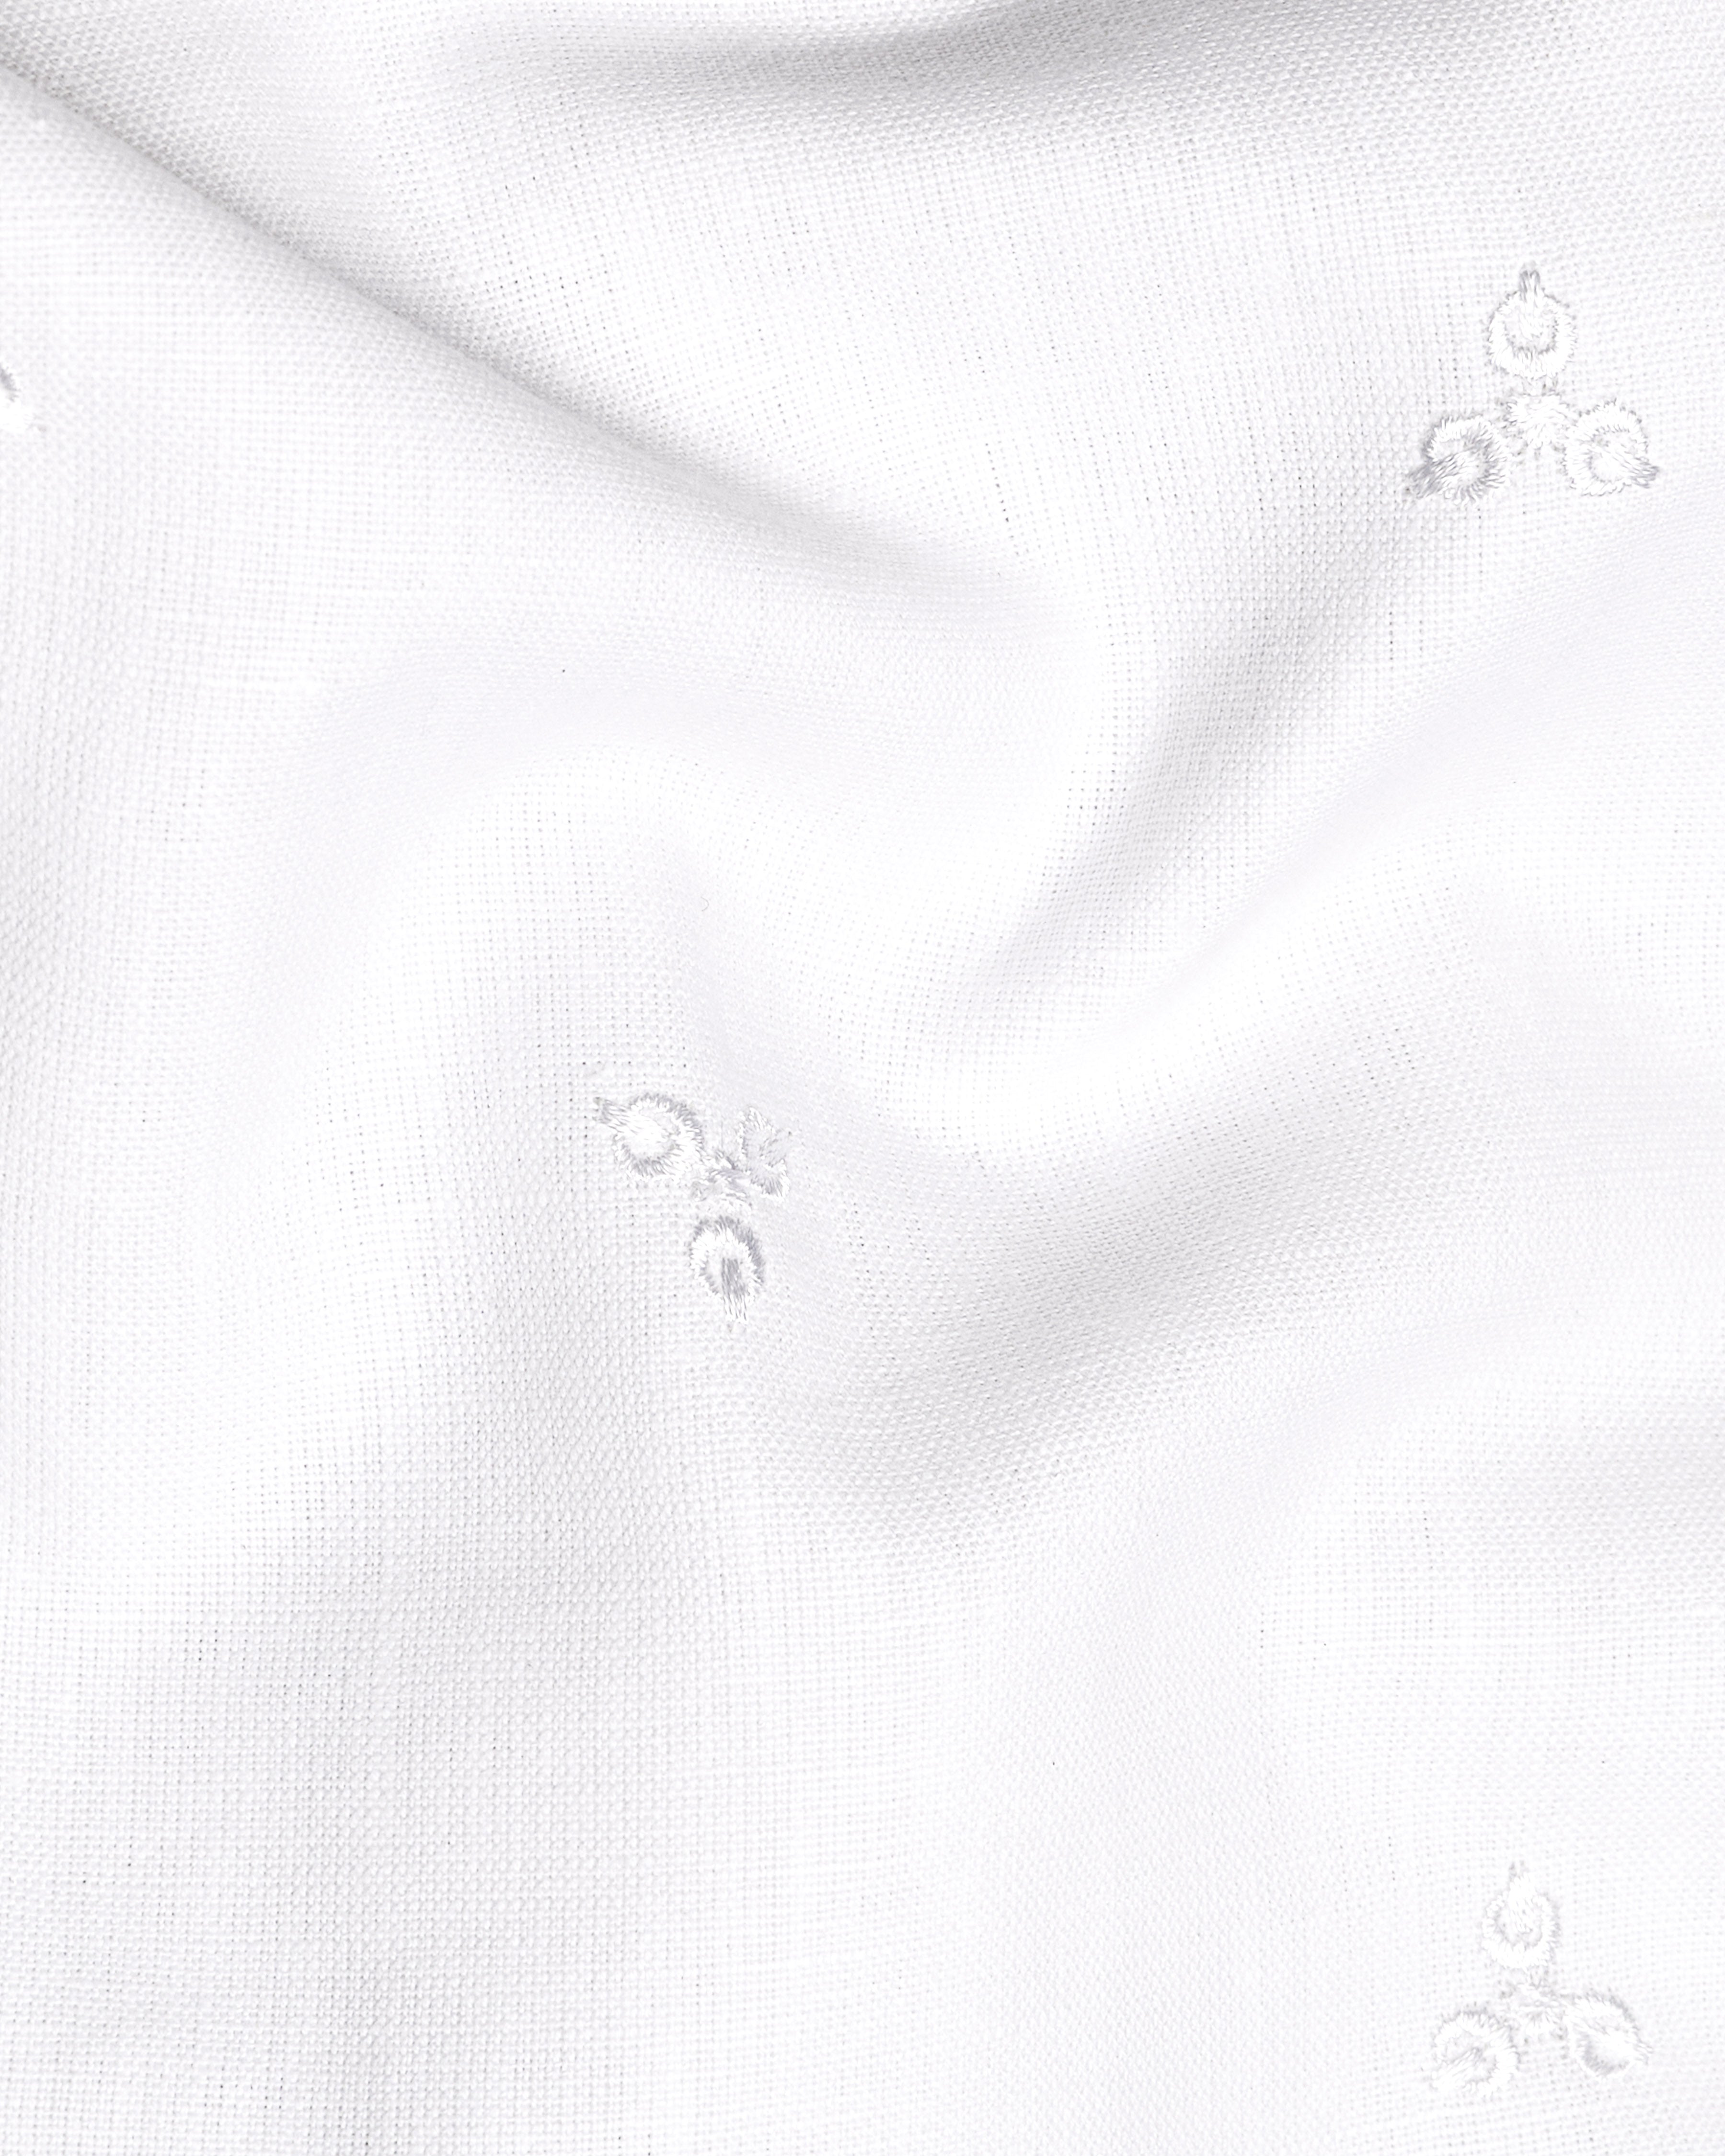 Bright White Embroidered Luxurious Linen Shirt 9721-38, 9721-H-38, 9721-39, 9721-H-39, 9721-40, 9721-H-40, 9721-42, 9721-H-42, 9721-44, 9721-H-44, 9721-46, 9721-H-46, 9721-48, 9721-H-48, 9721-50, 9721-H-50, 9721-52, 9721-H-52